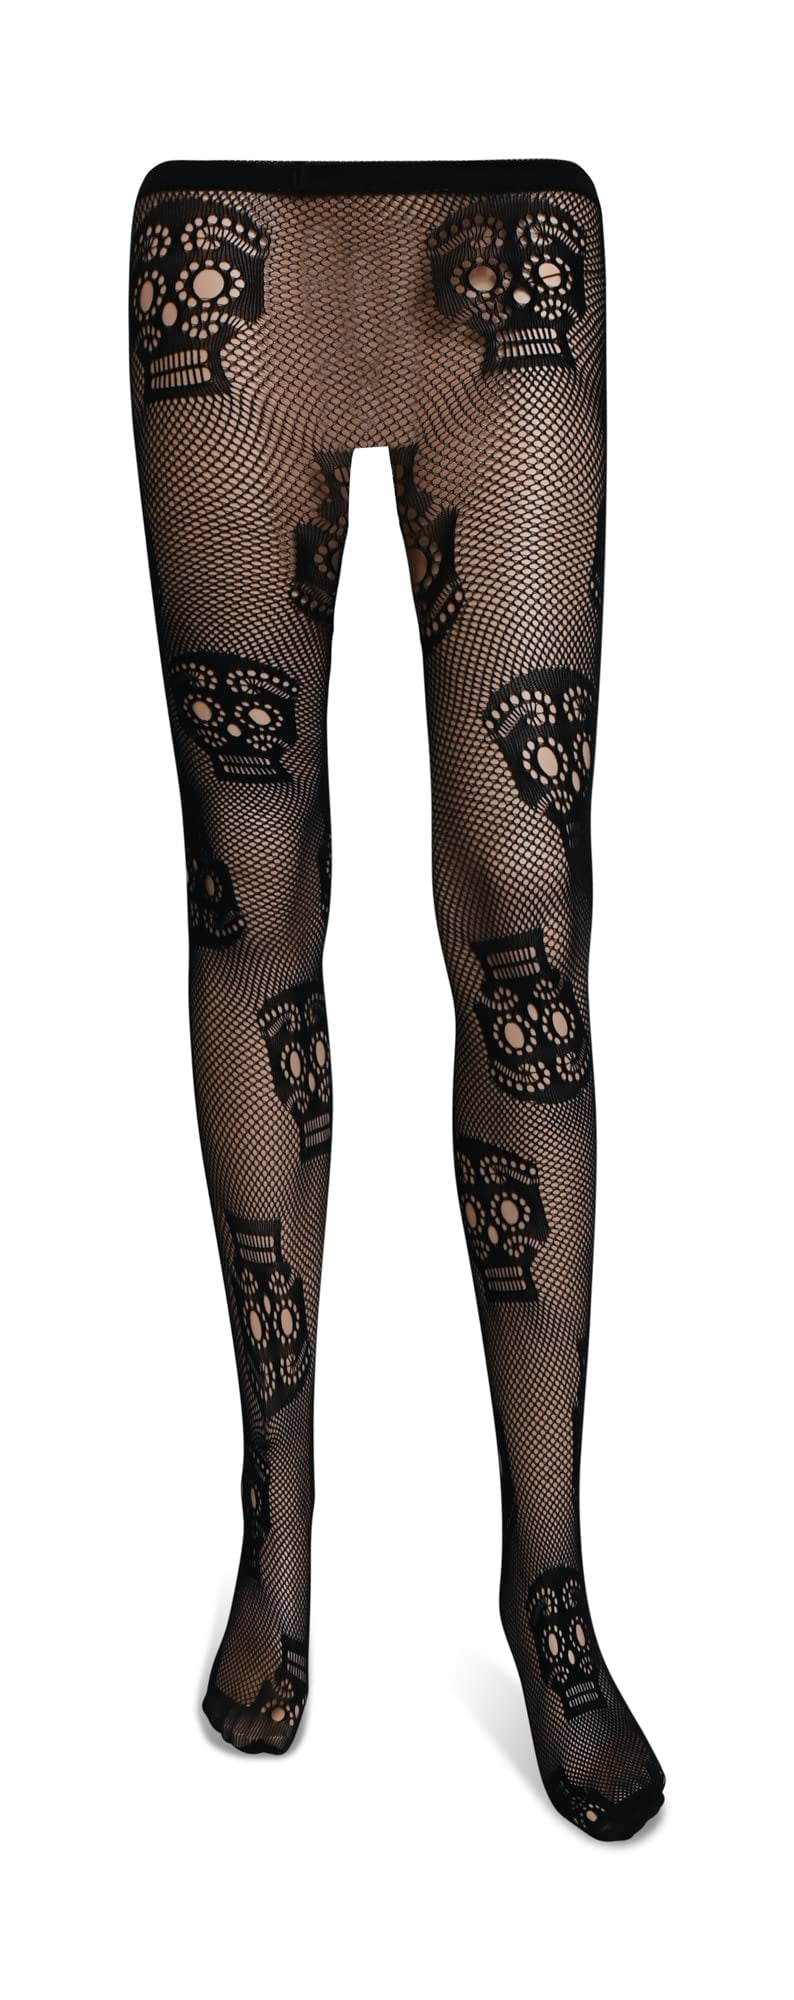 Women s Patterned Stockings Tights Halloween Skull Print Tights Pantyhose  Gifts